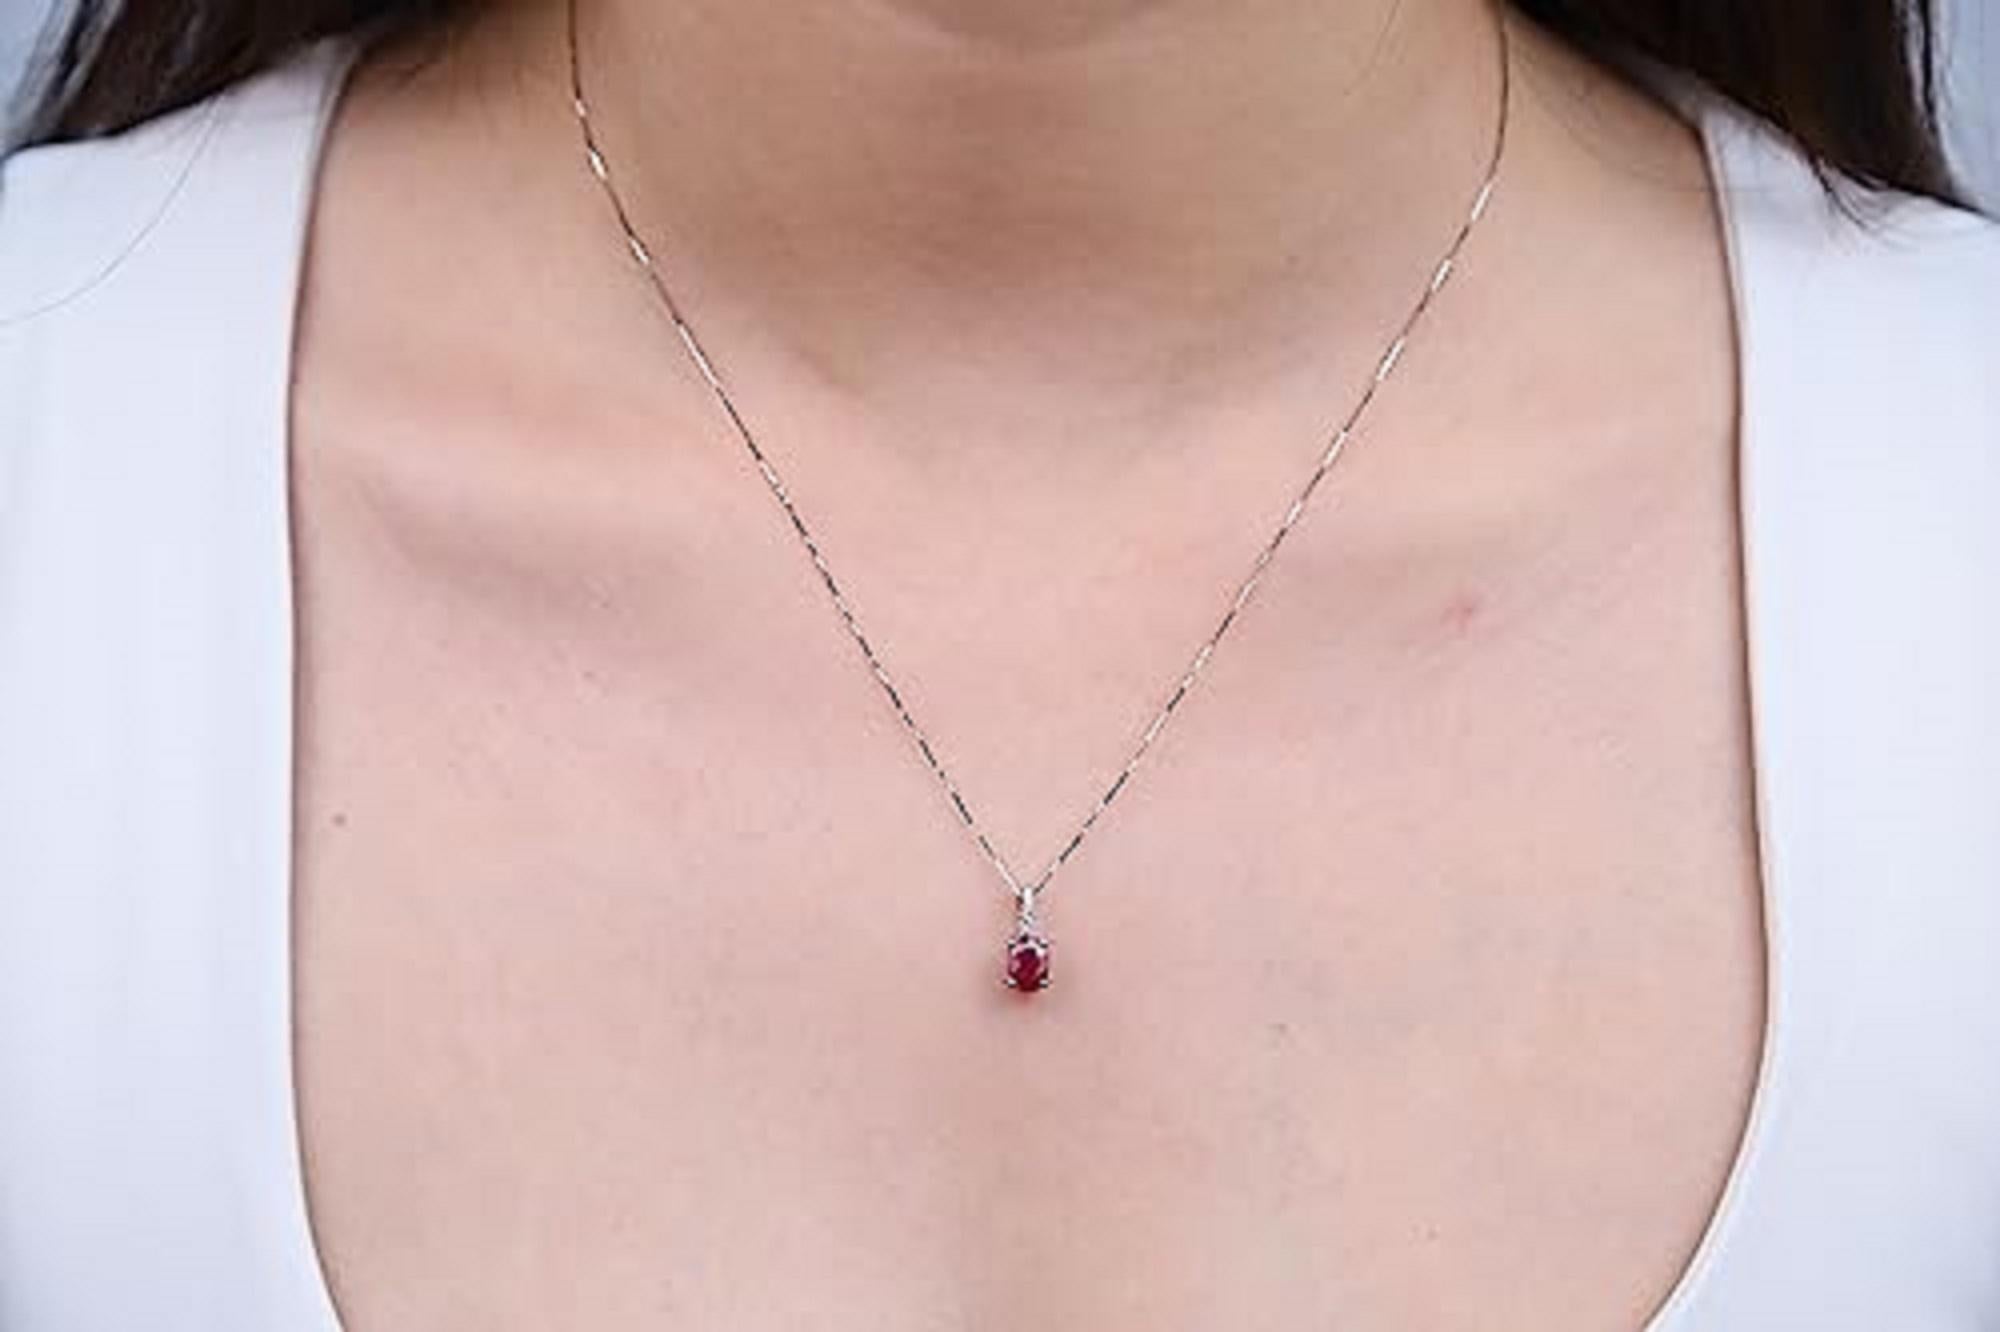 Decorate yourself in elegance with this Pendant is crafted from 10-karat White Gold by Gin & Grace. This Pendant is made up of 7x5 mm Oval Ruby (1 pcs) 1.06 carat and Round-cut White Diamond (5 Pcs) 0.04 Carat. This Pendant is weight 0.63 grams.